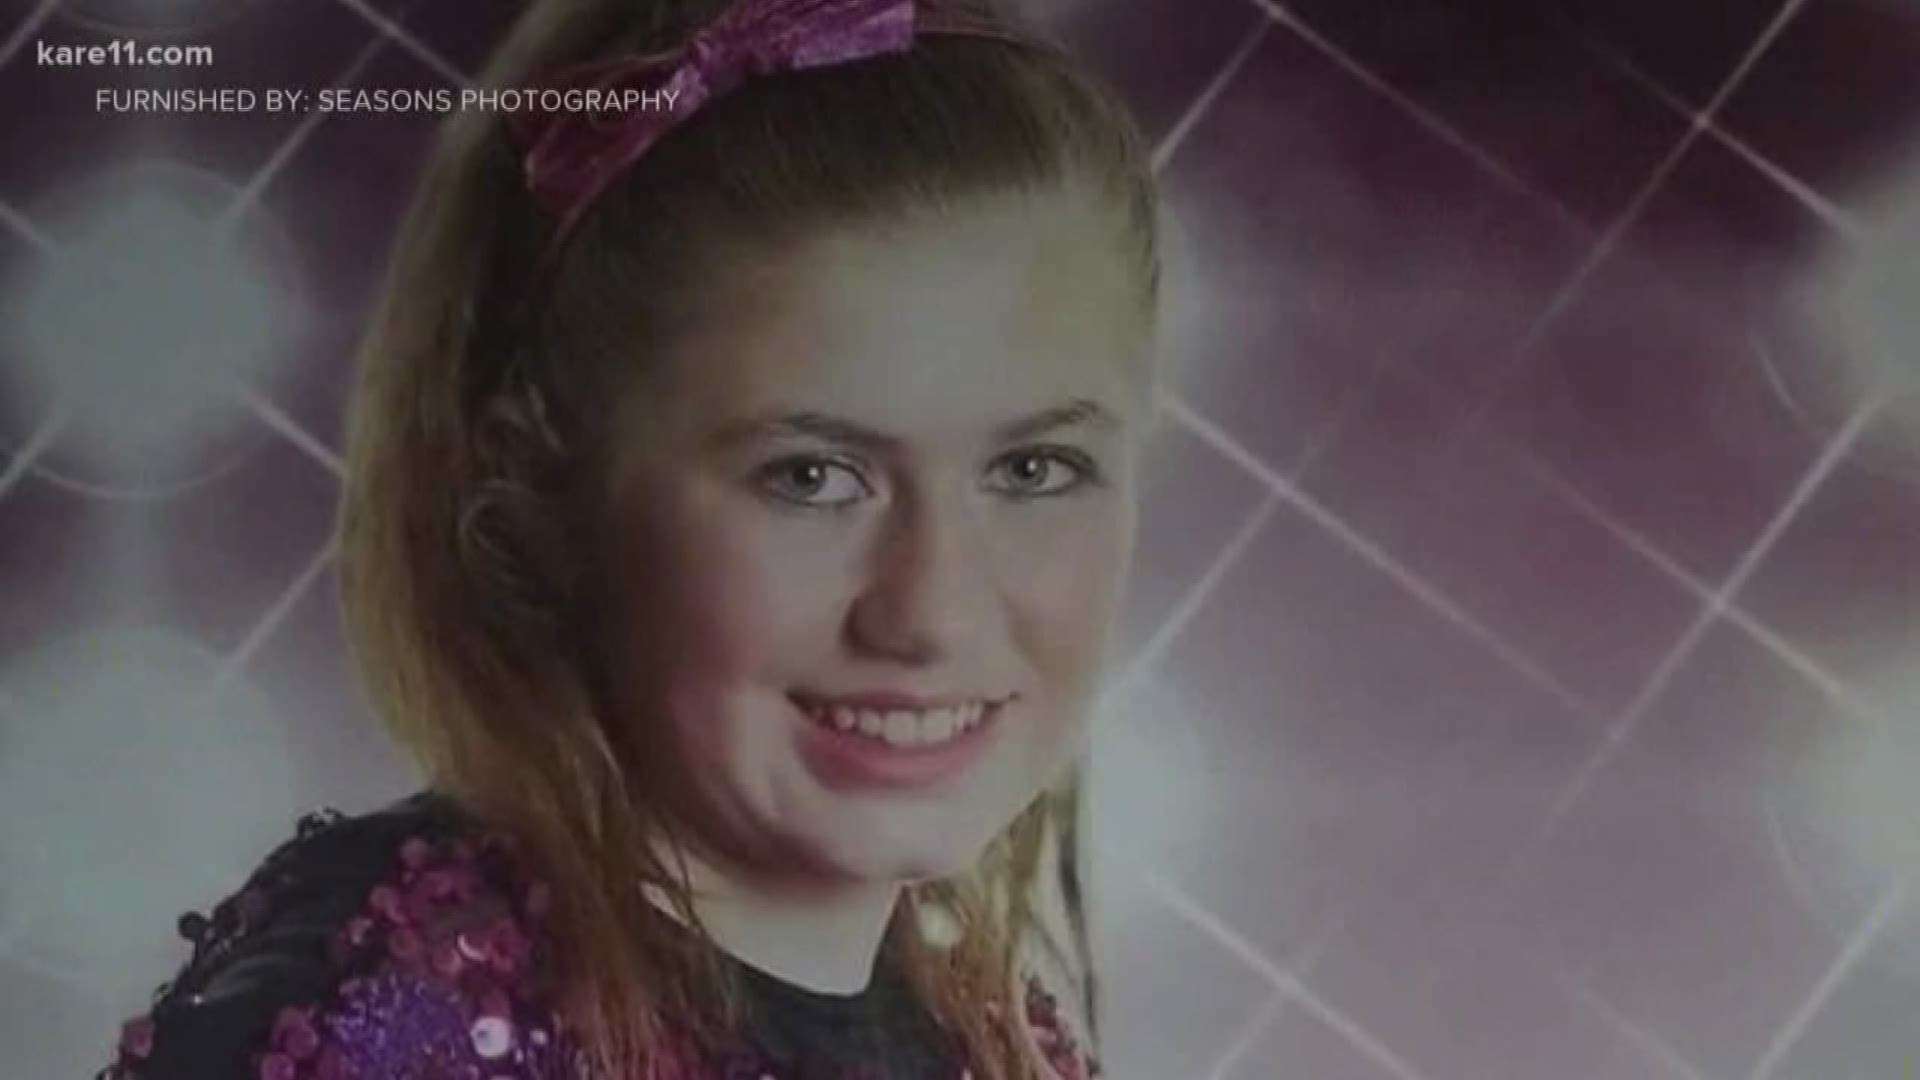 Jayme Closs, 13, was found alive near Gordon, Wisconsin on Thursday. She had been missing since Oct. 15, 2018. A suspect has been arrested. KARE 11's Lou Raguse talked with her family about the incredible news. https://kare11.tv/2Ci06vV